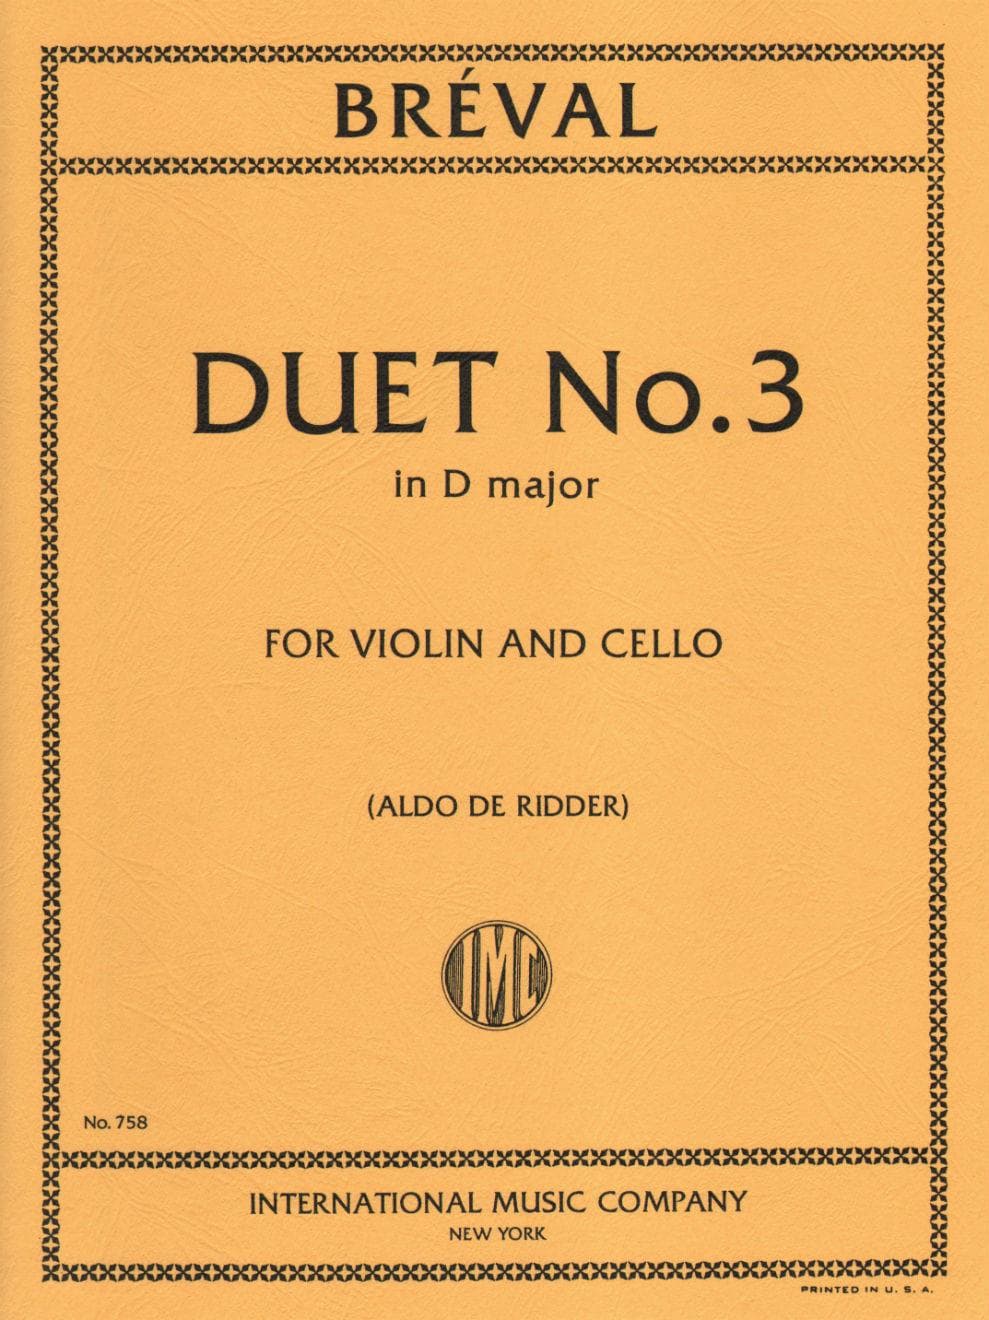 Breval, Jean Baptiste - Duet in D Major Op 19 No 3 for Violin and Cello - Arranged by Ridder - International Edition